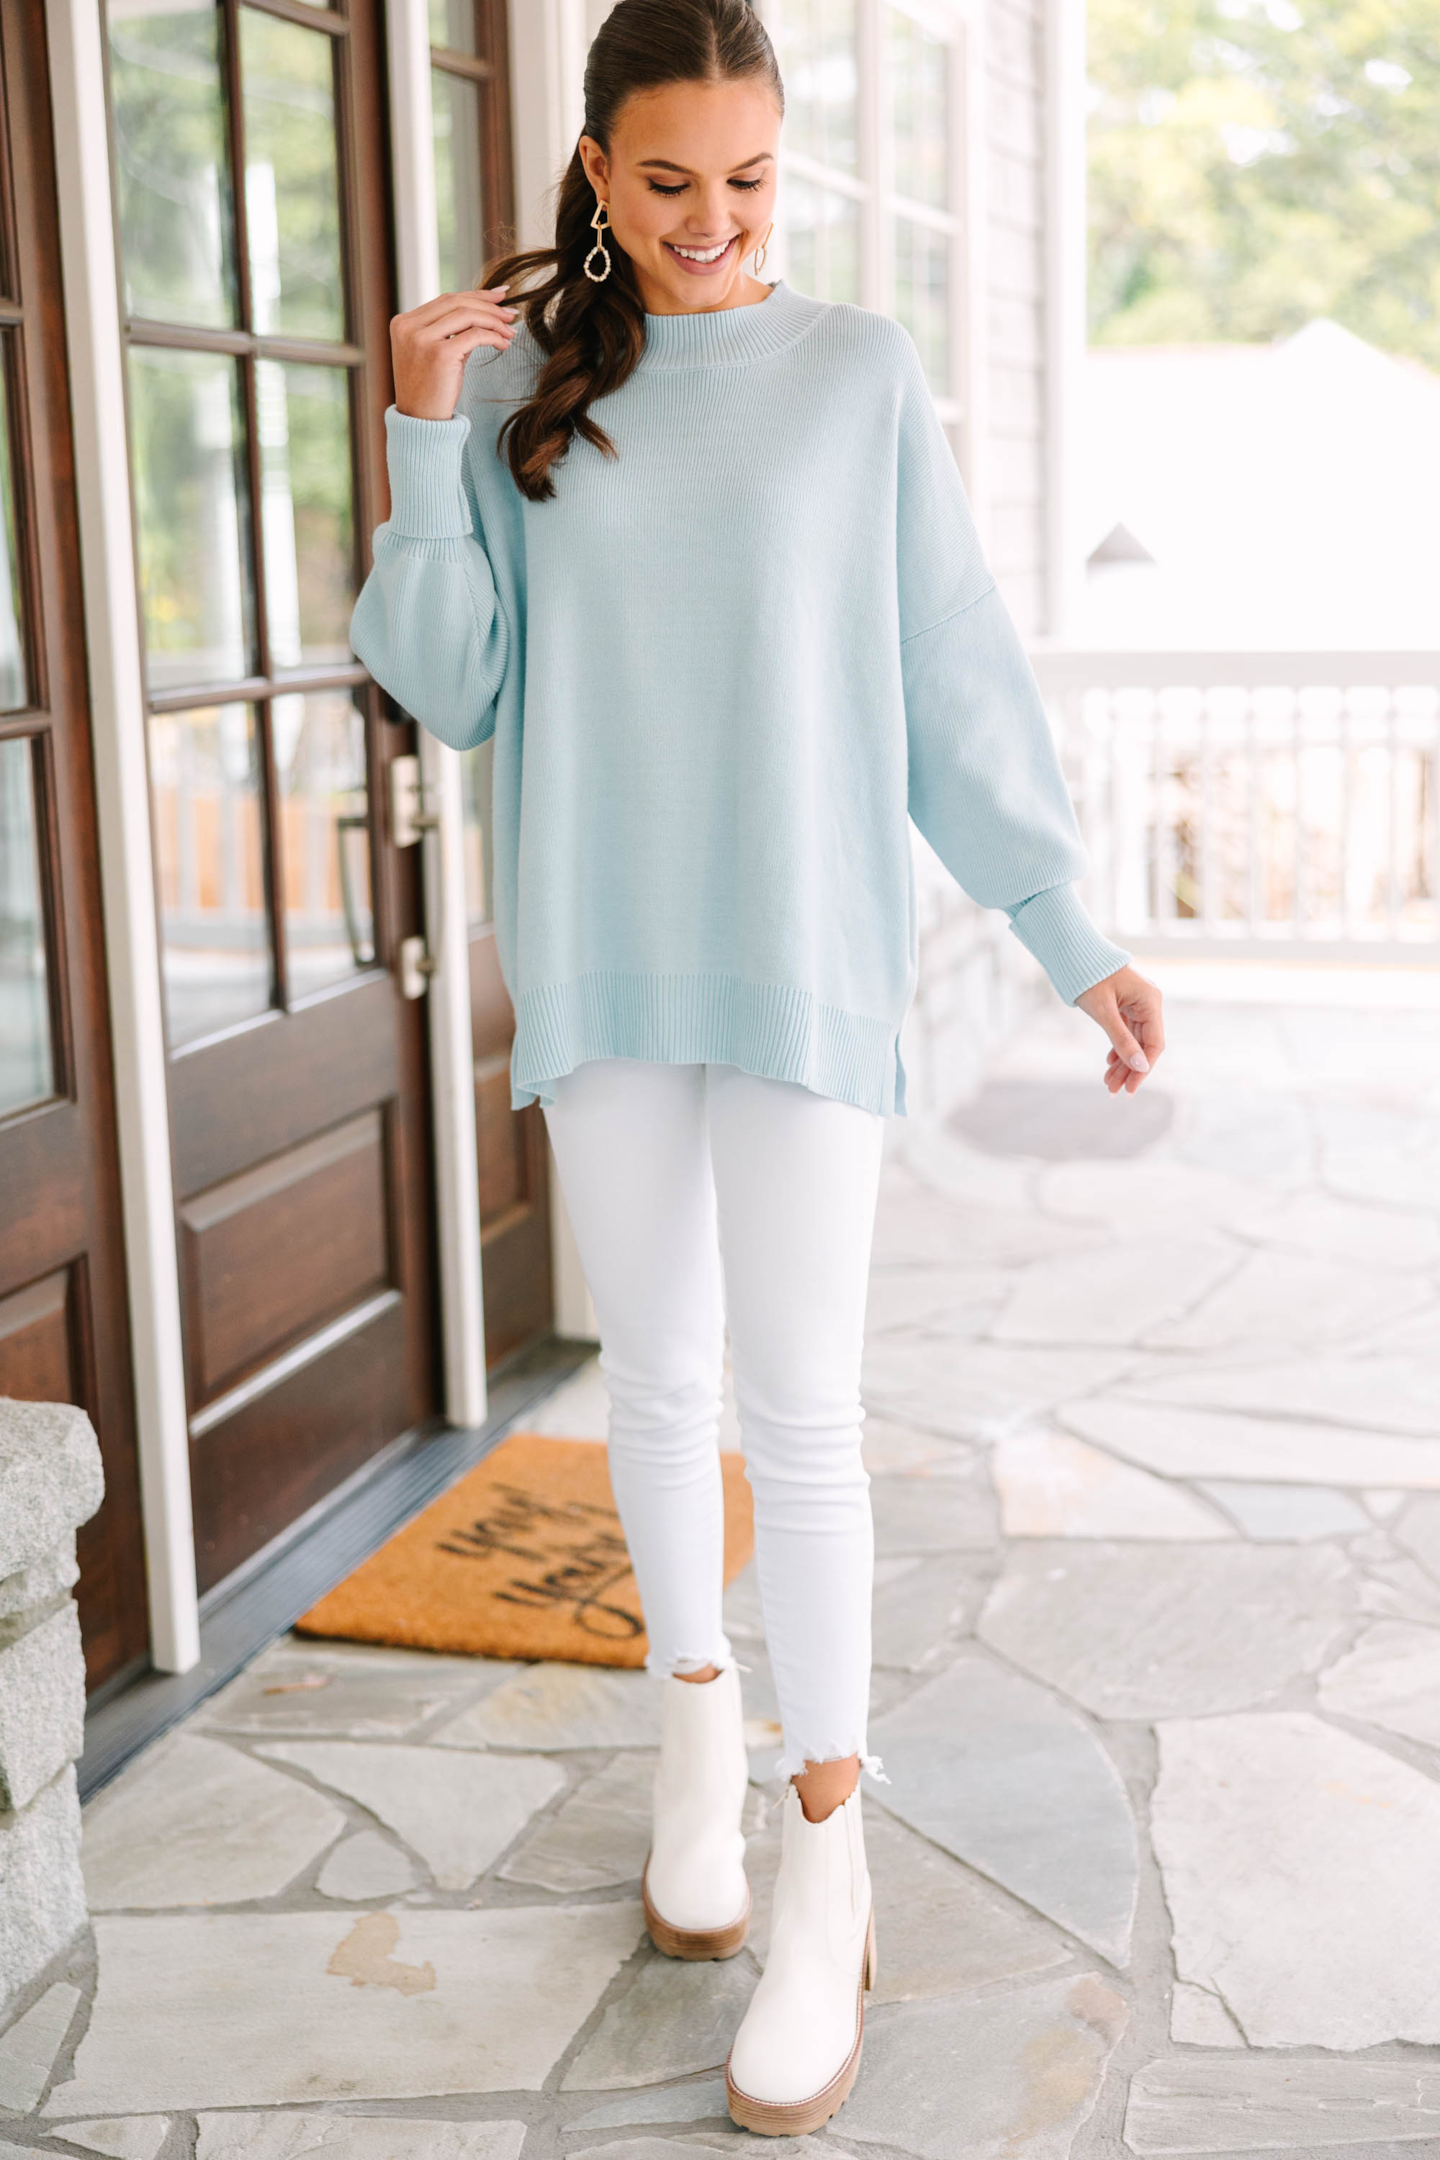 https://shopthemint.com/products/perfectly-you-light-blue-mock-neck-sweater?variant=39733631418426